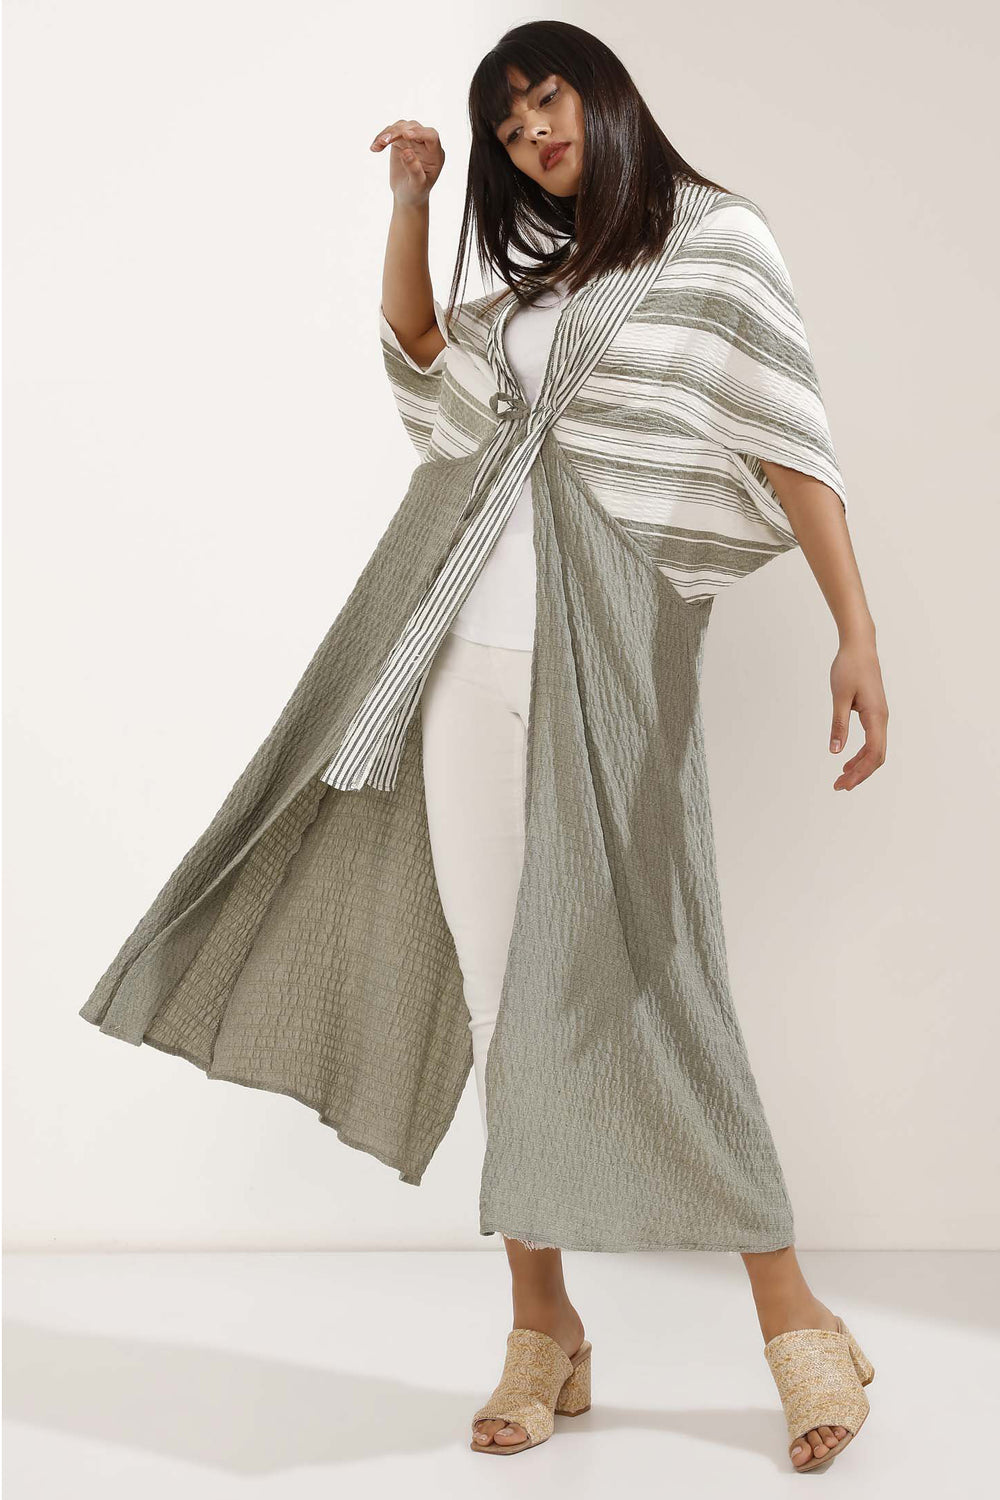 Store WF Tie Front Mix Stripe Linen Kimono in Soft Linen Modest Long and Loose Kimono with Sleeves